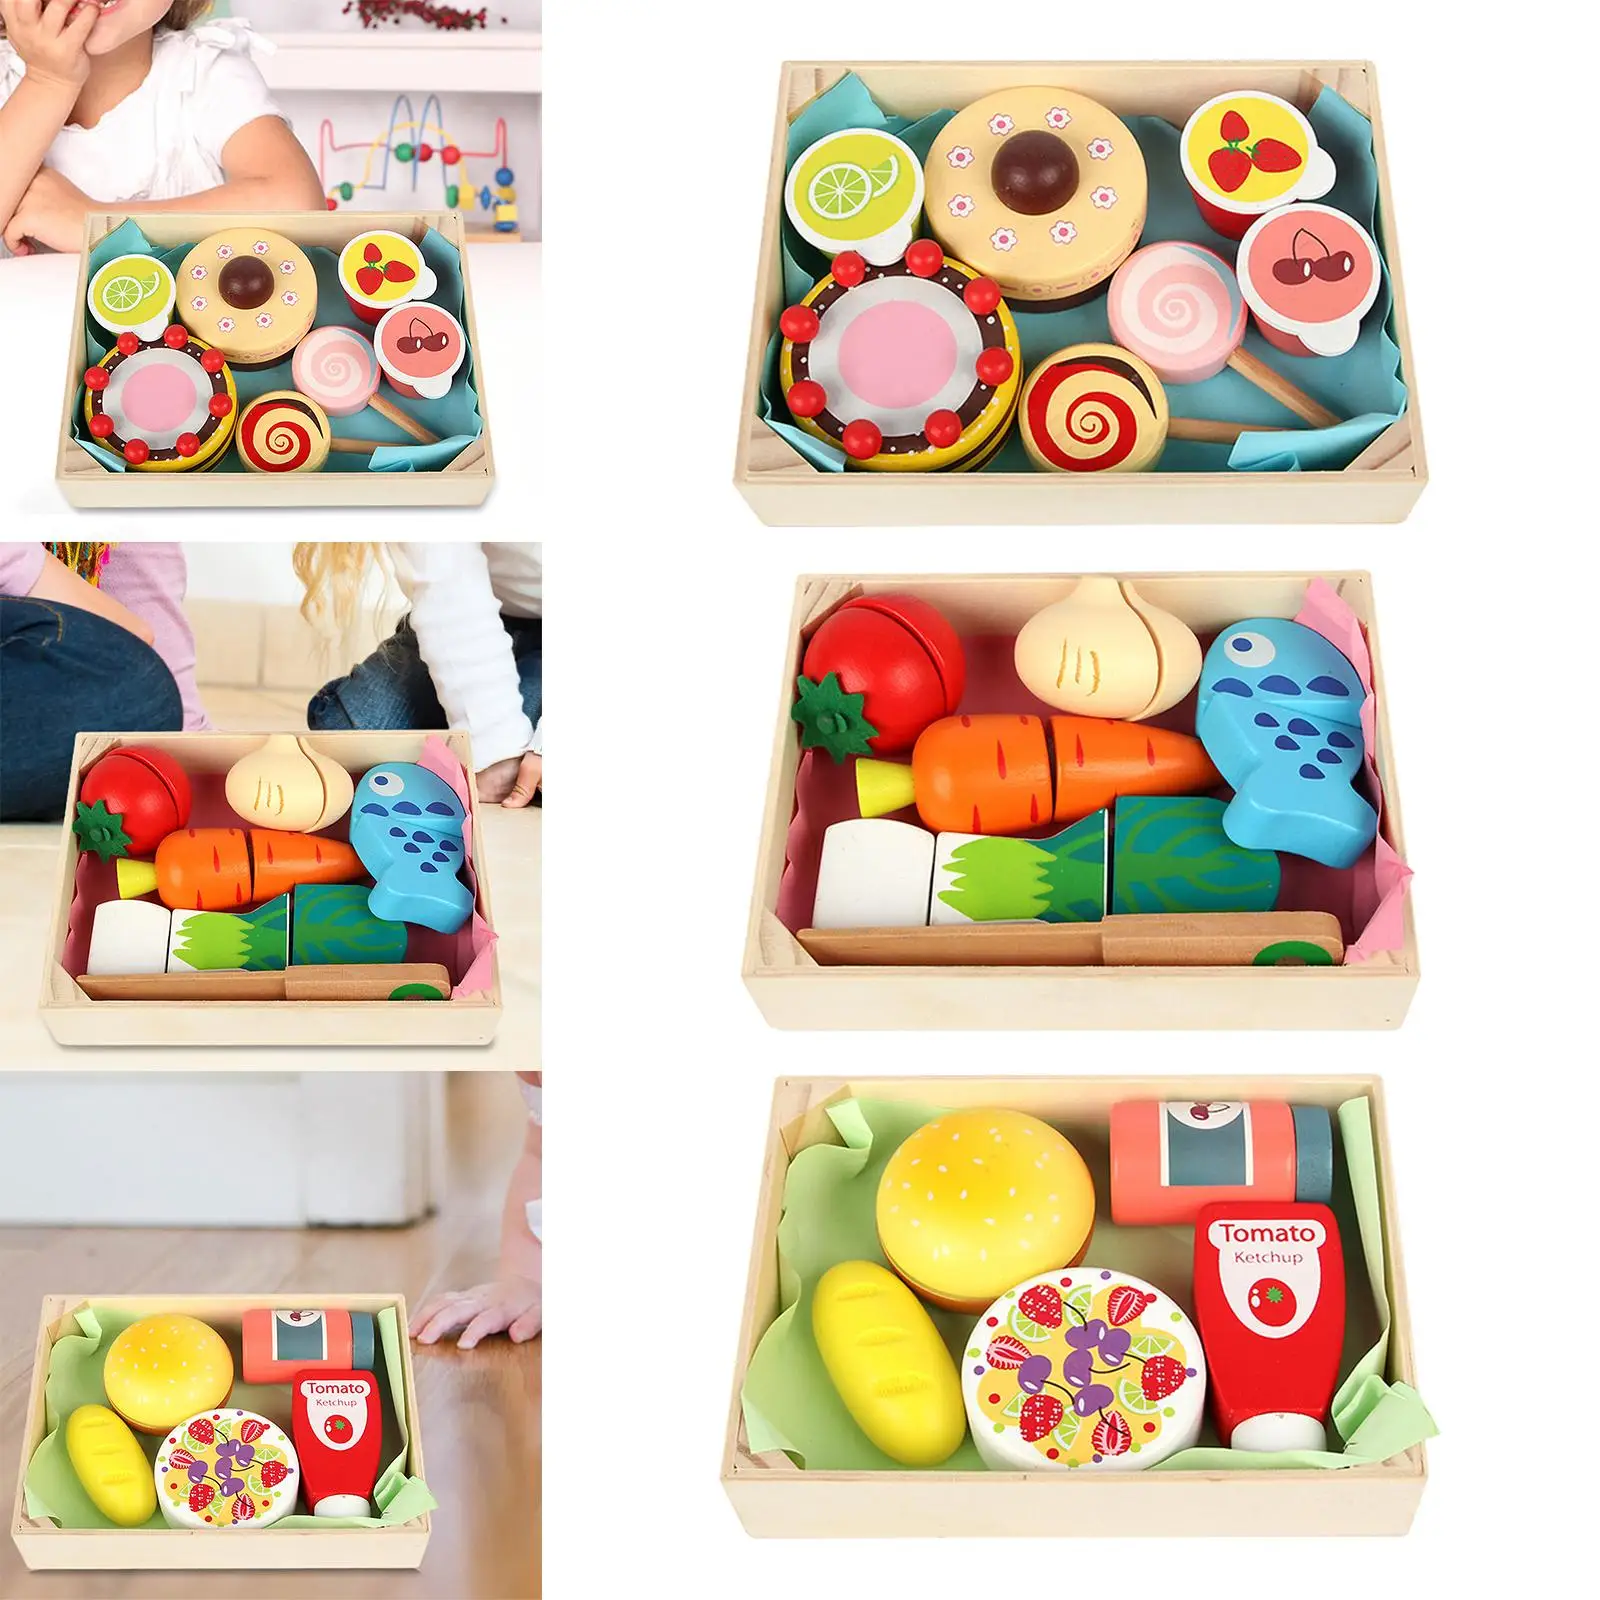 Wooden Food Pretend Role Play Interactive Toys for Boys Girls Children Preschool Gifts